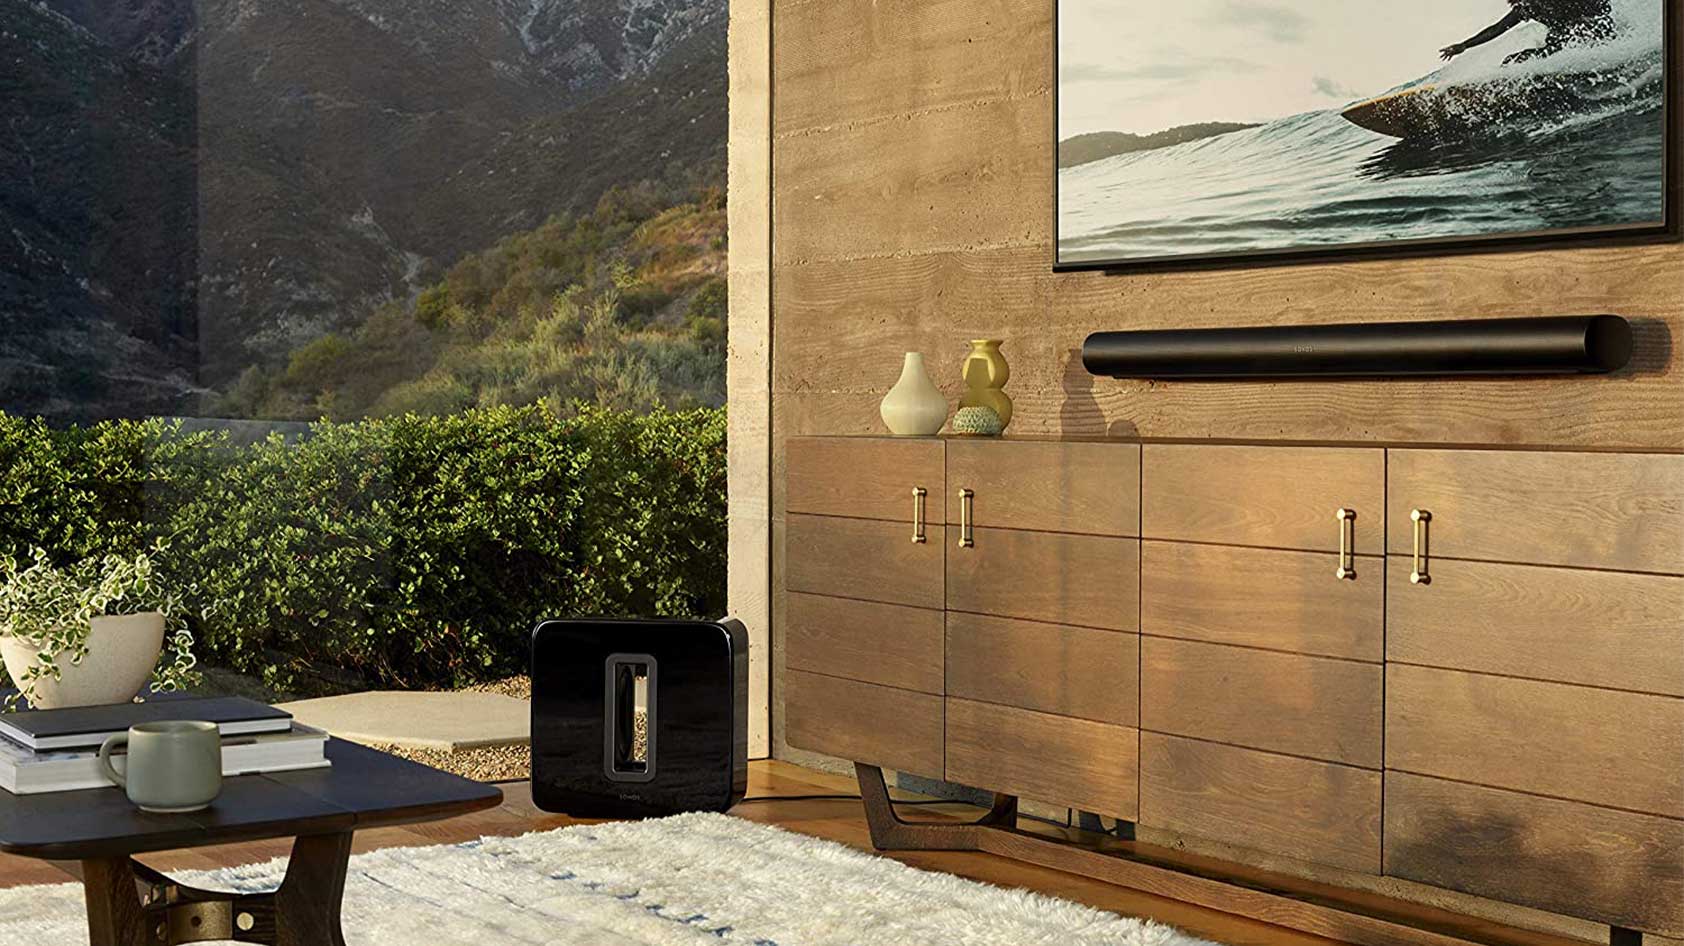 The Sonos Arc and Sonos Sub in black in a living room.